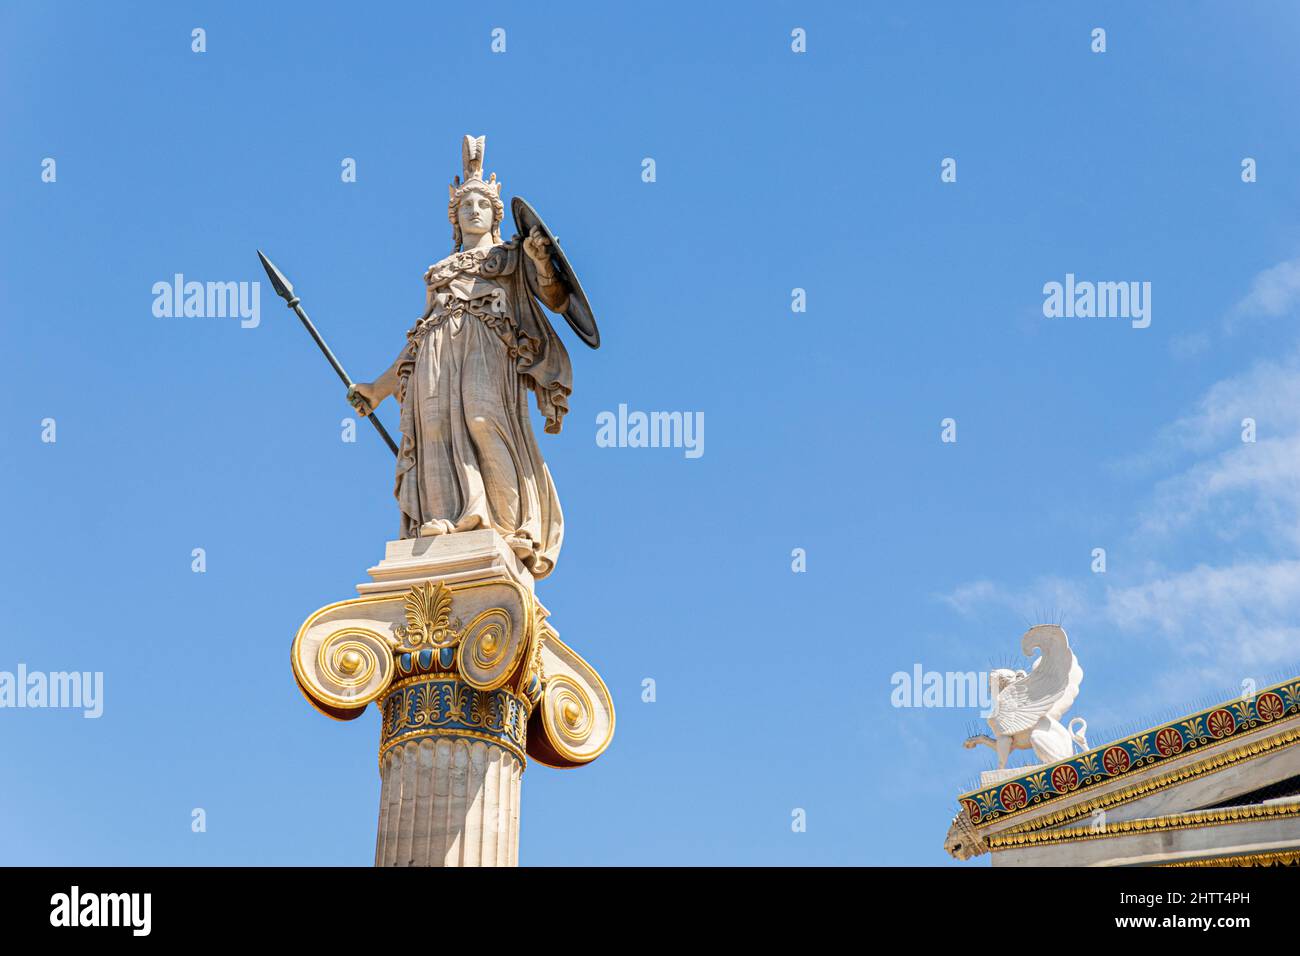 Athens, Greece. Column statue of godess Athena, one of the Olympian deities in classical Greek religion, in the modern Academy of Athens Stock Photo